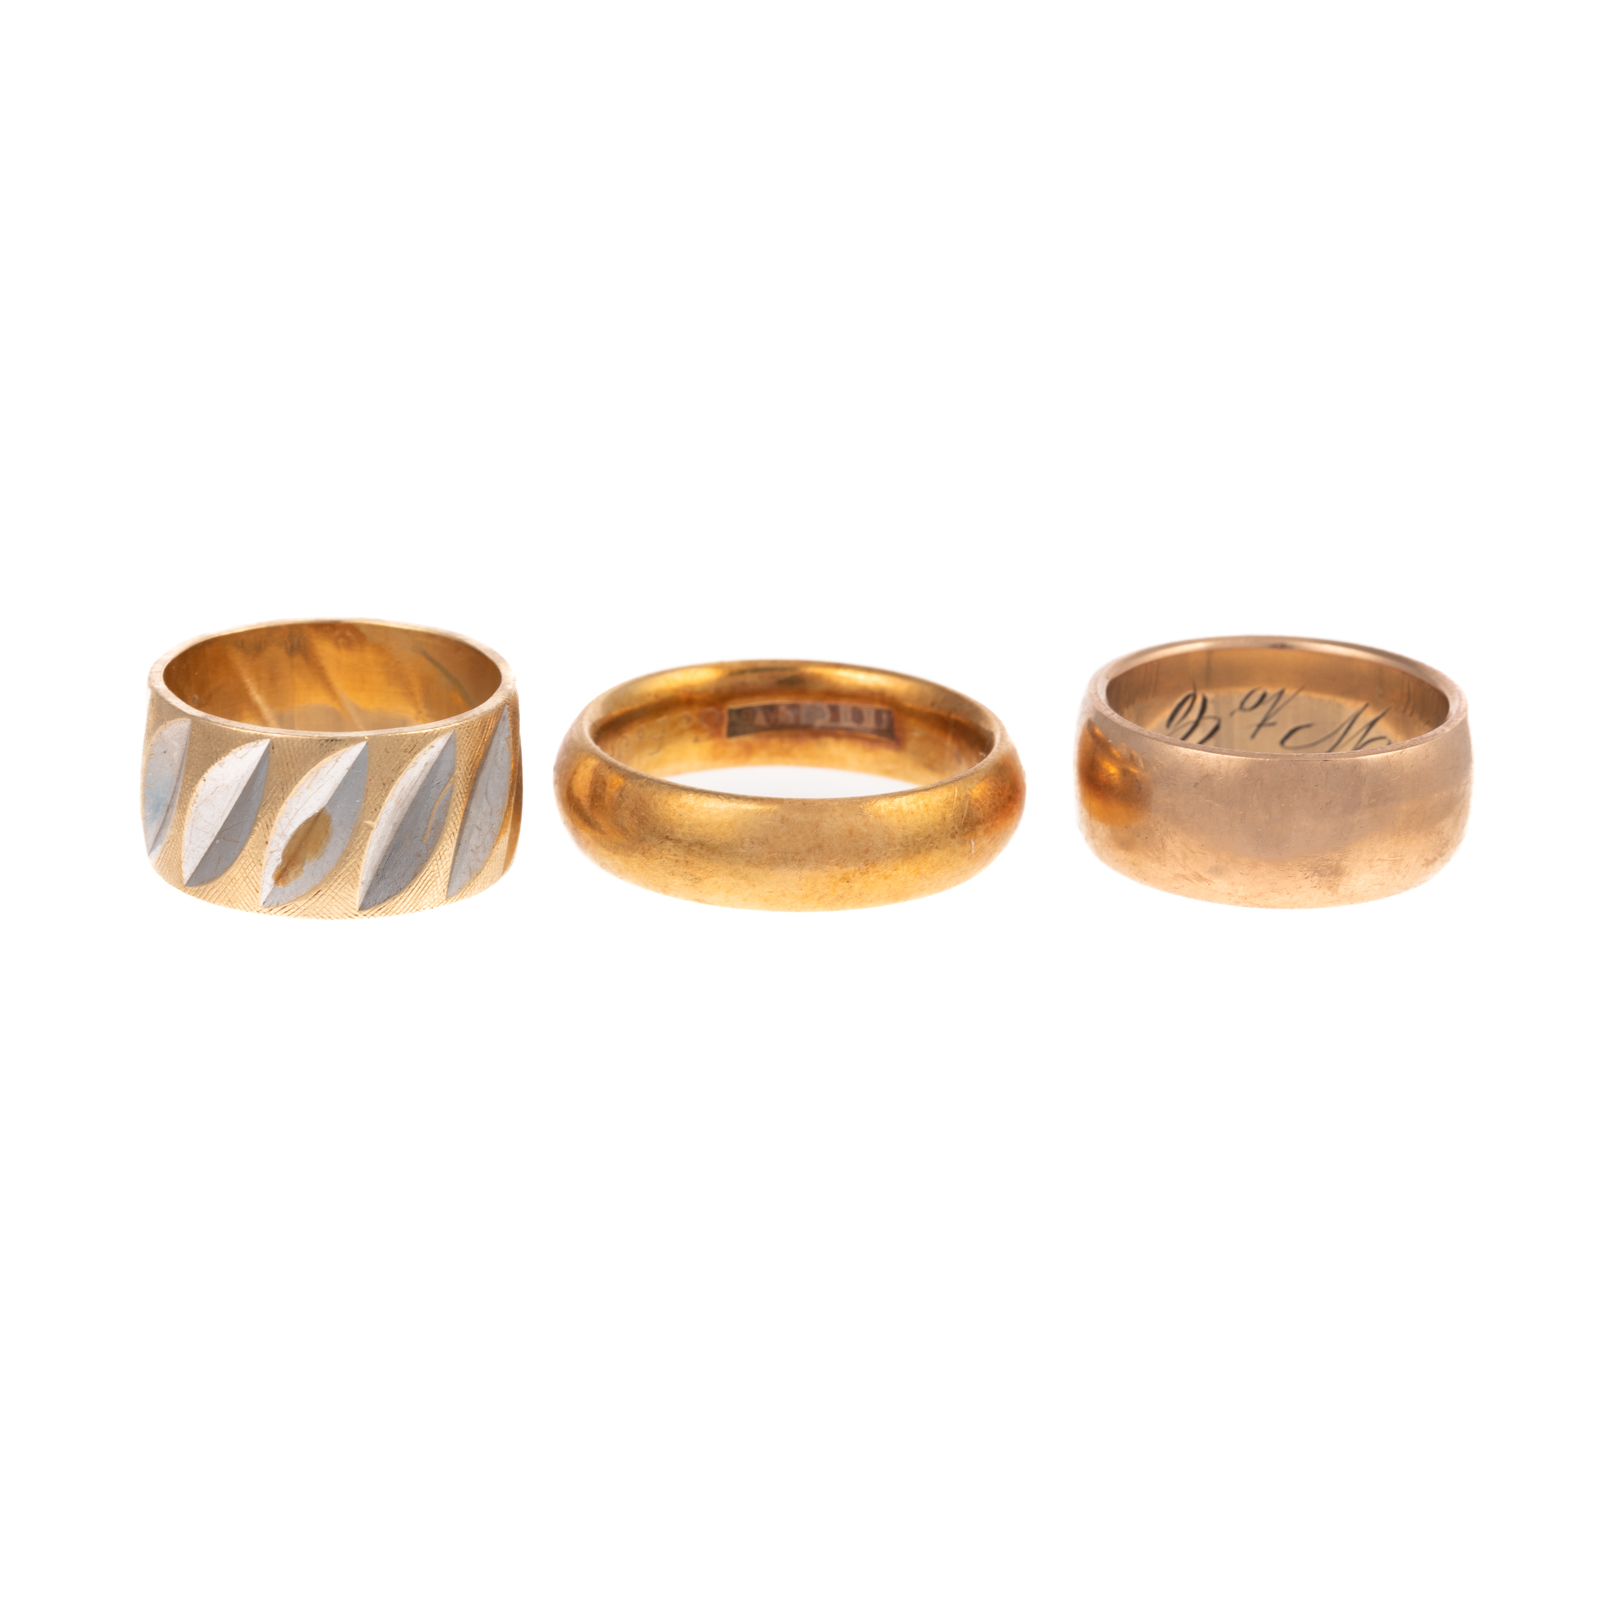 A TRIO OF VINTAGE GOLD BANDS IN 2878e8